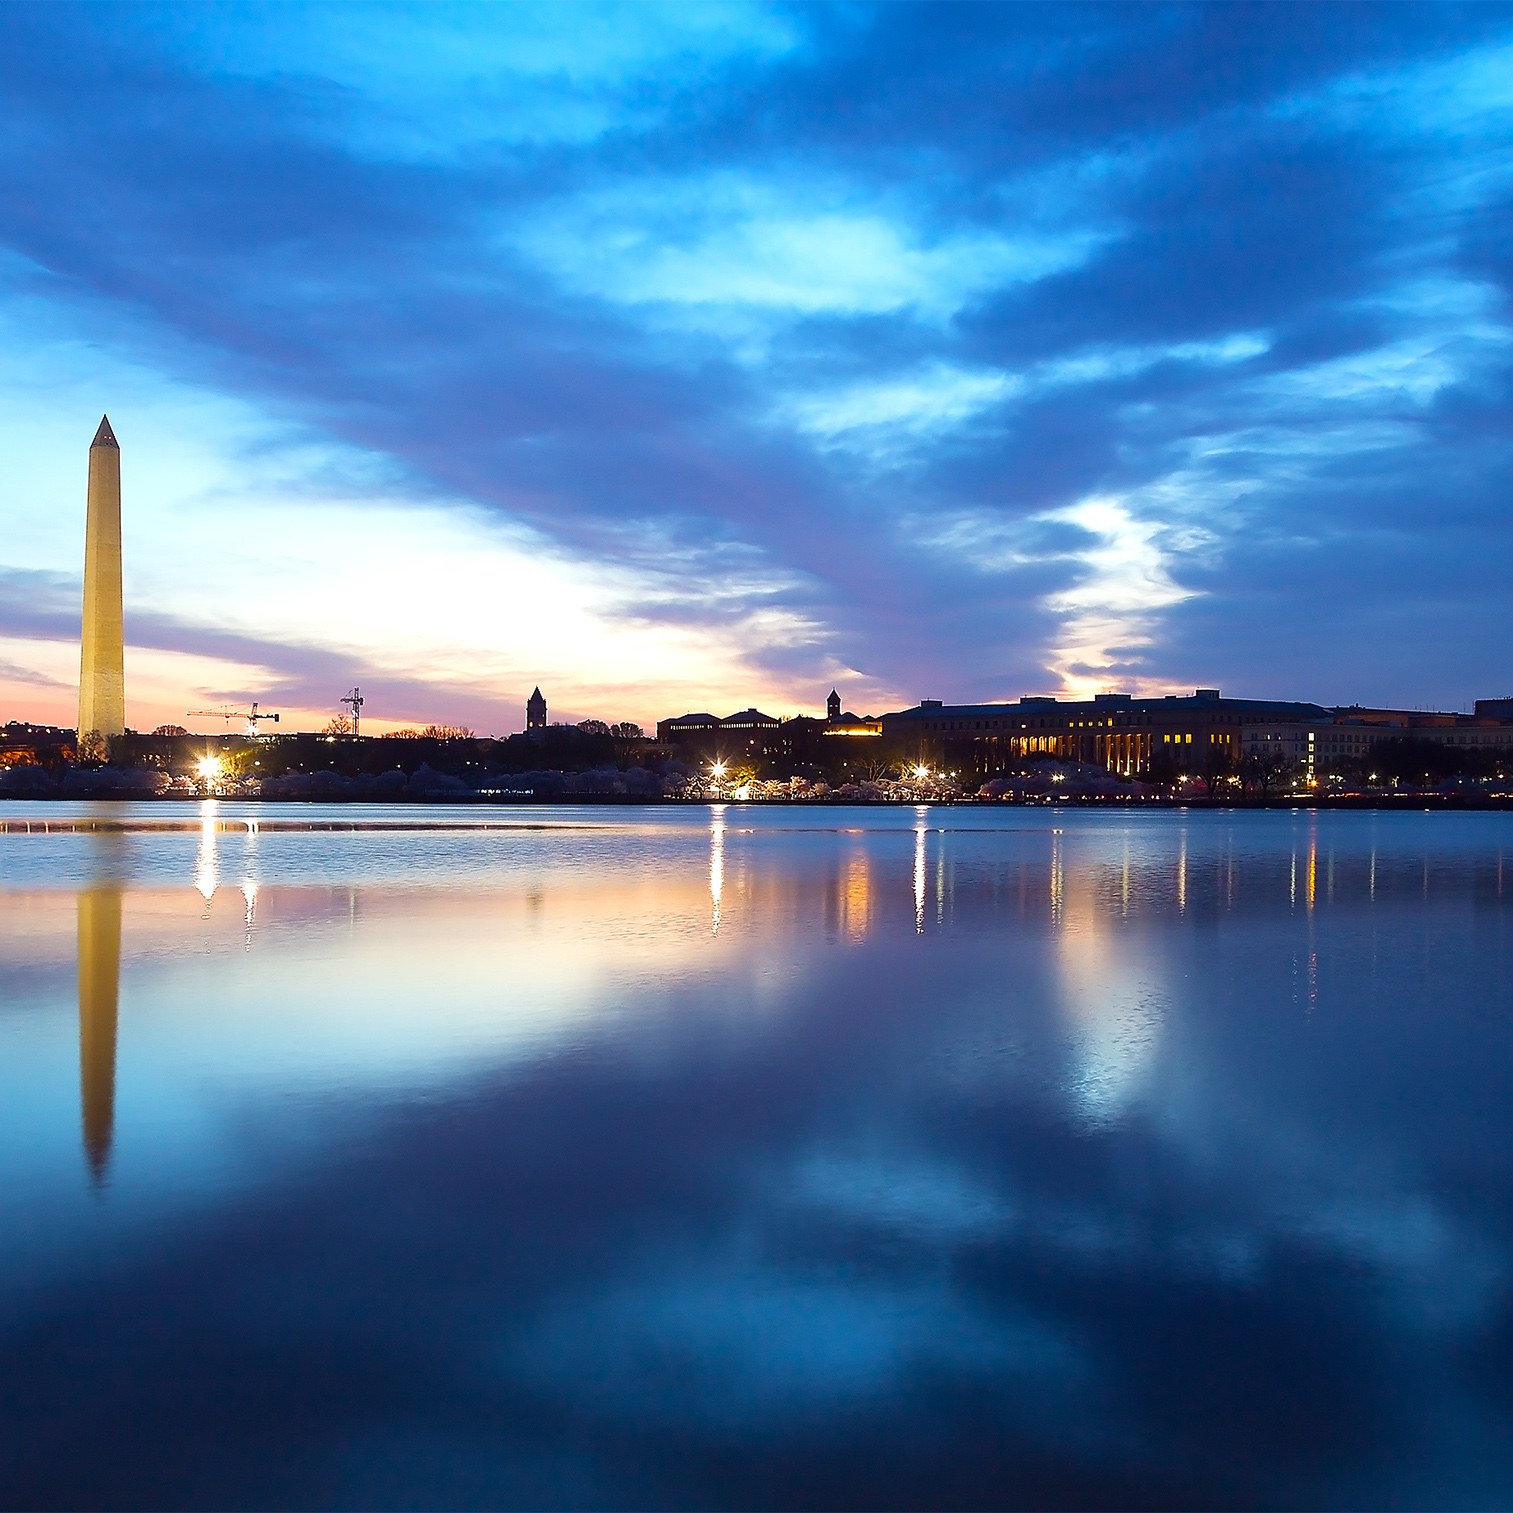 Washington D.C. skyline at sunset with Potomac River in the foreground.